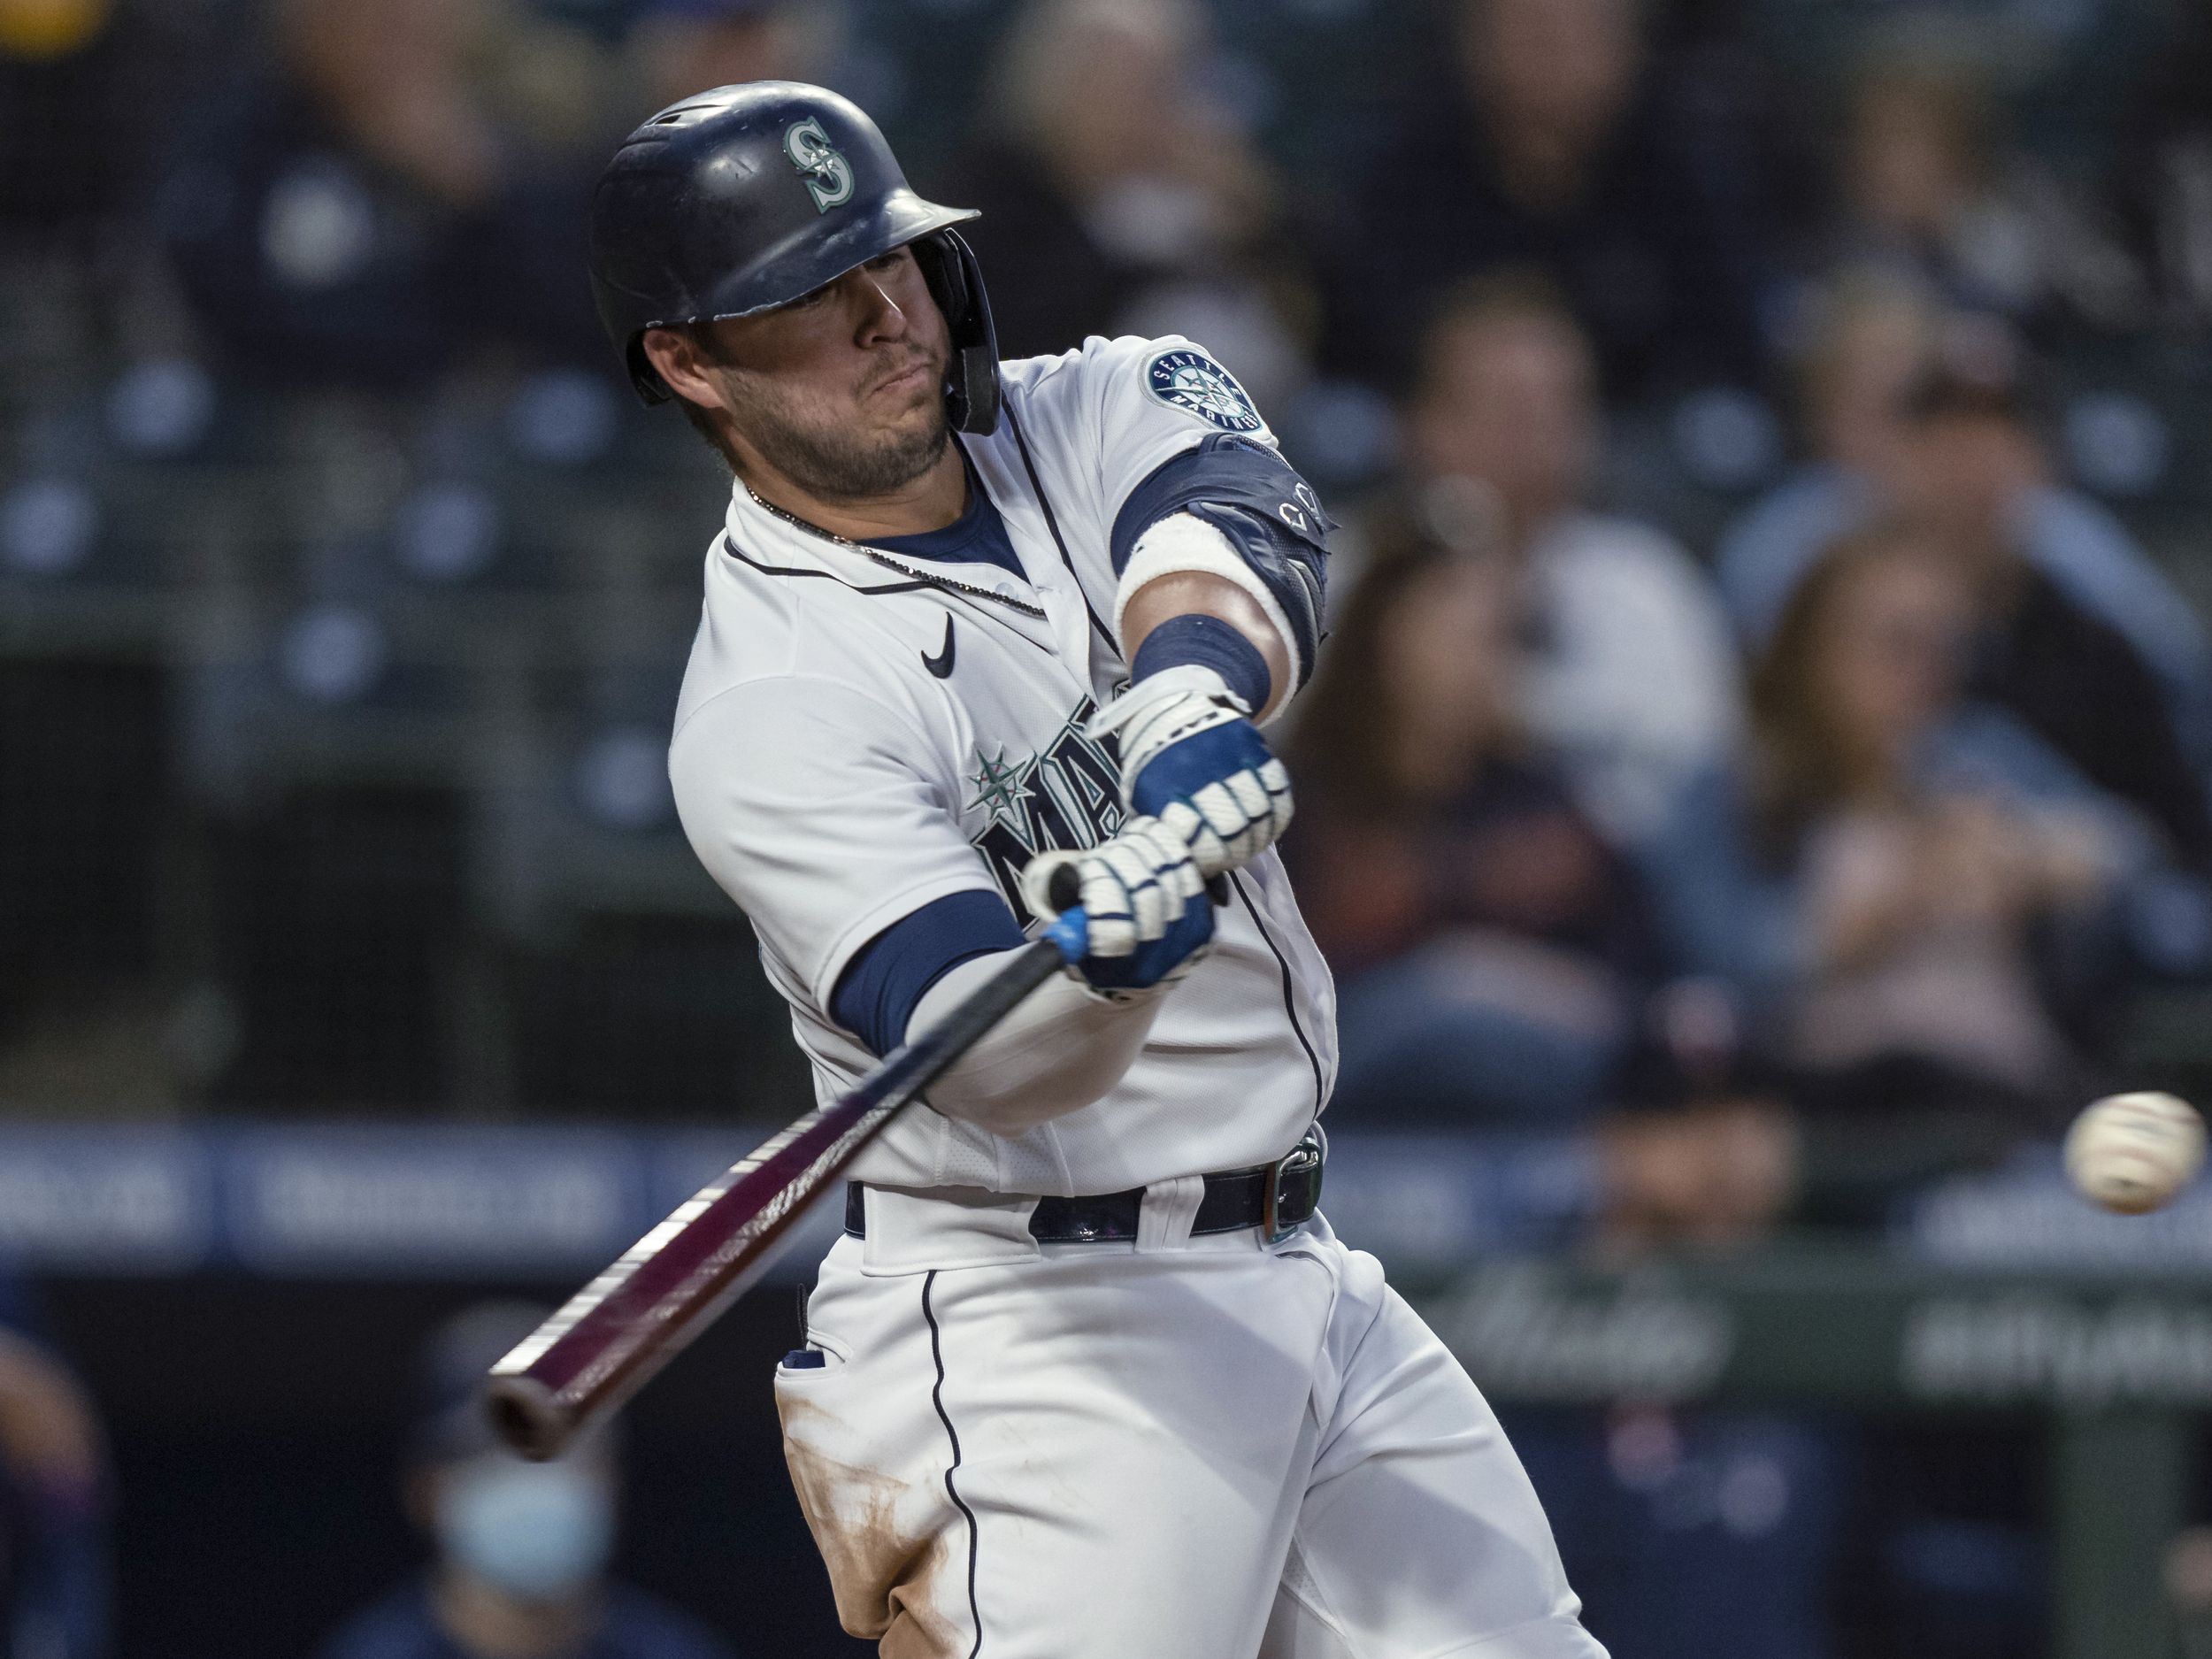 Ty France's caps five hit night with home run to lift Mariners over Royals  13-7 in back-and-forth game